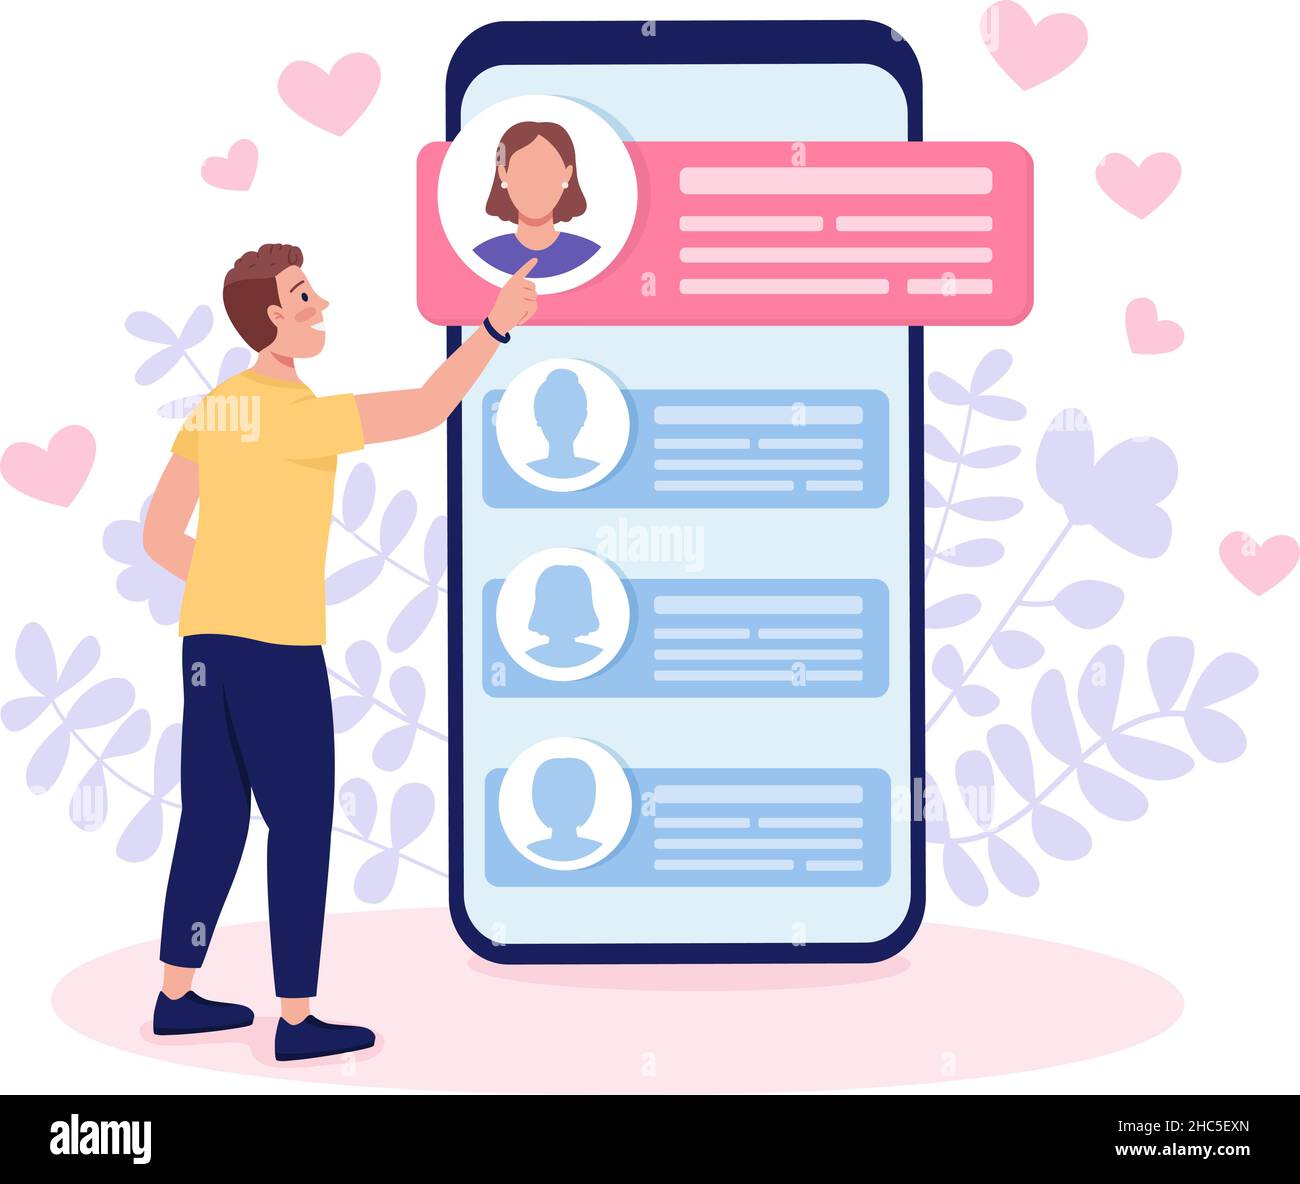 Looking for love online flat concept vector illustration Stock Vector